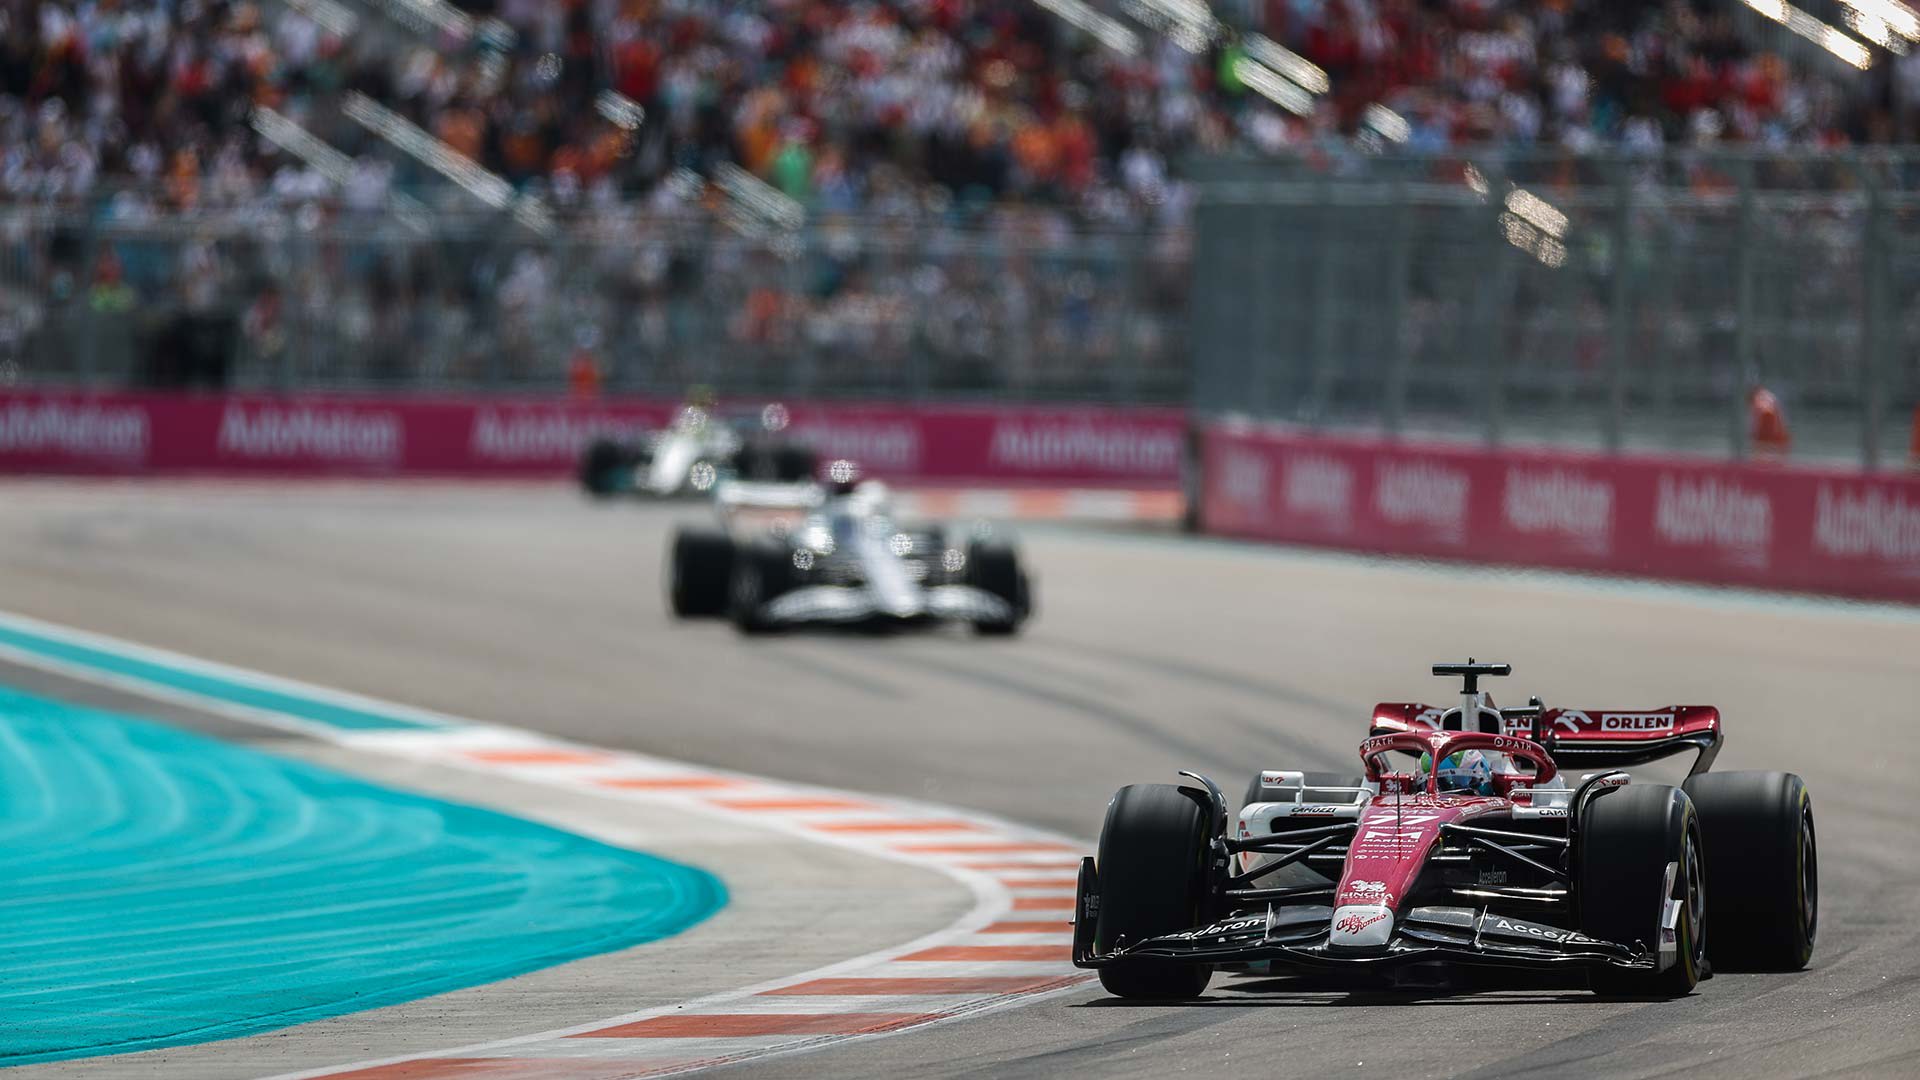 Bottas left ruing late-race mistake and Safety Car in Miami that cost him shot at P5 Formula 1®